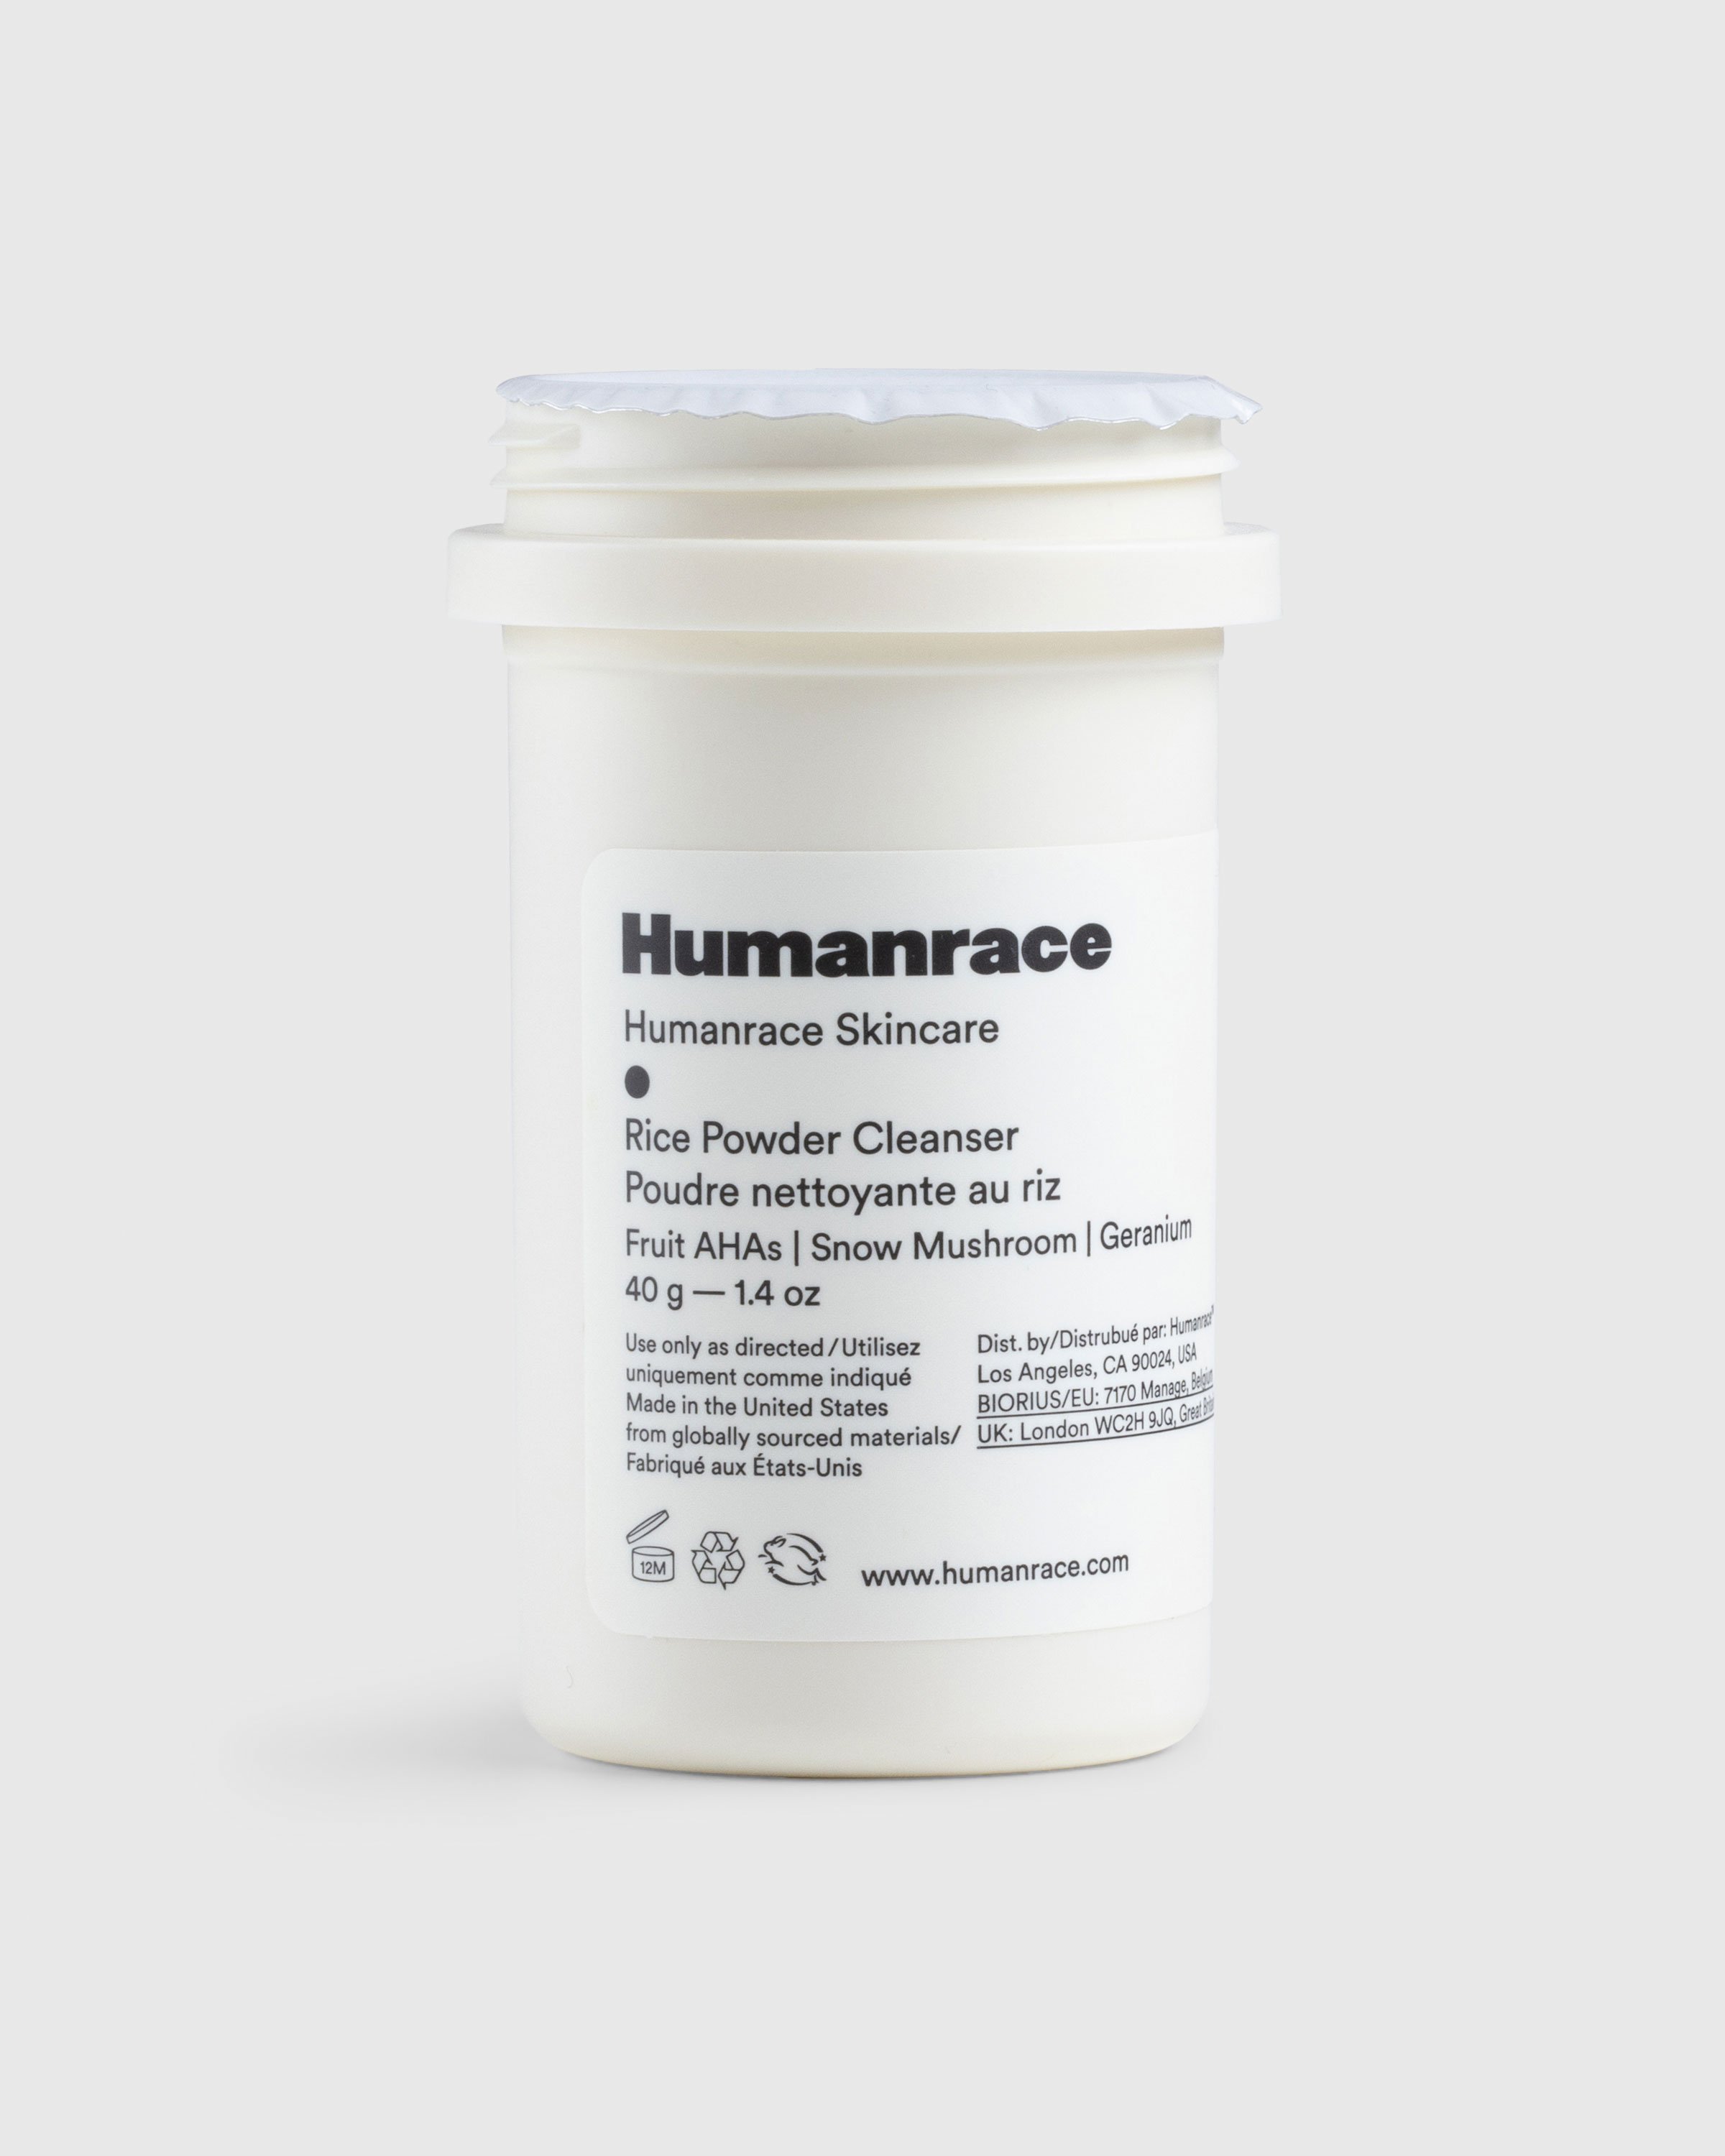 Humanrace - Rice Powder Cleanser Refill - Lifestyle - Beige - Image 1